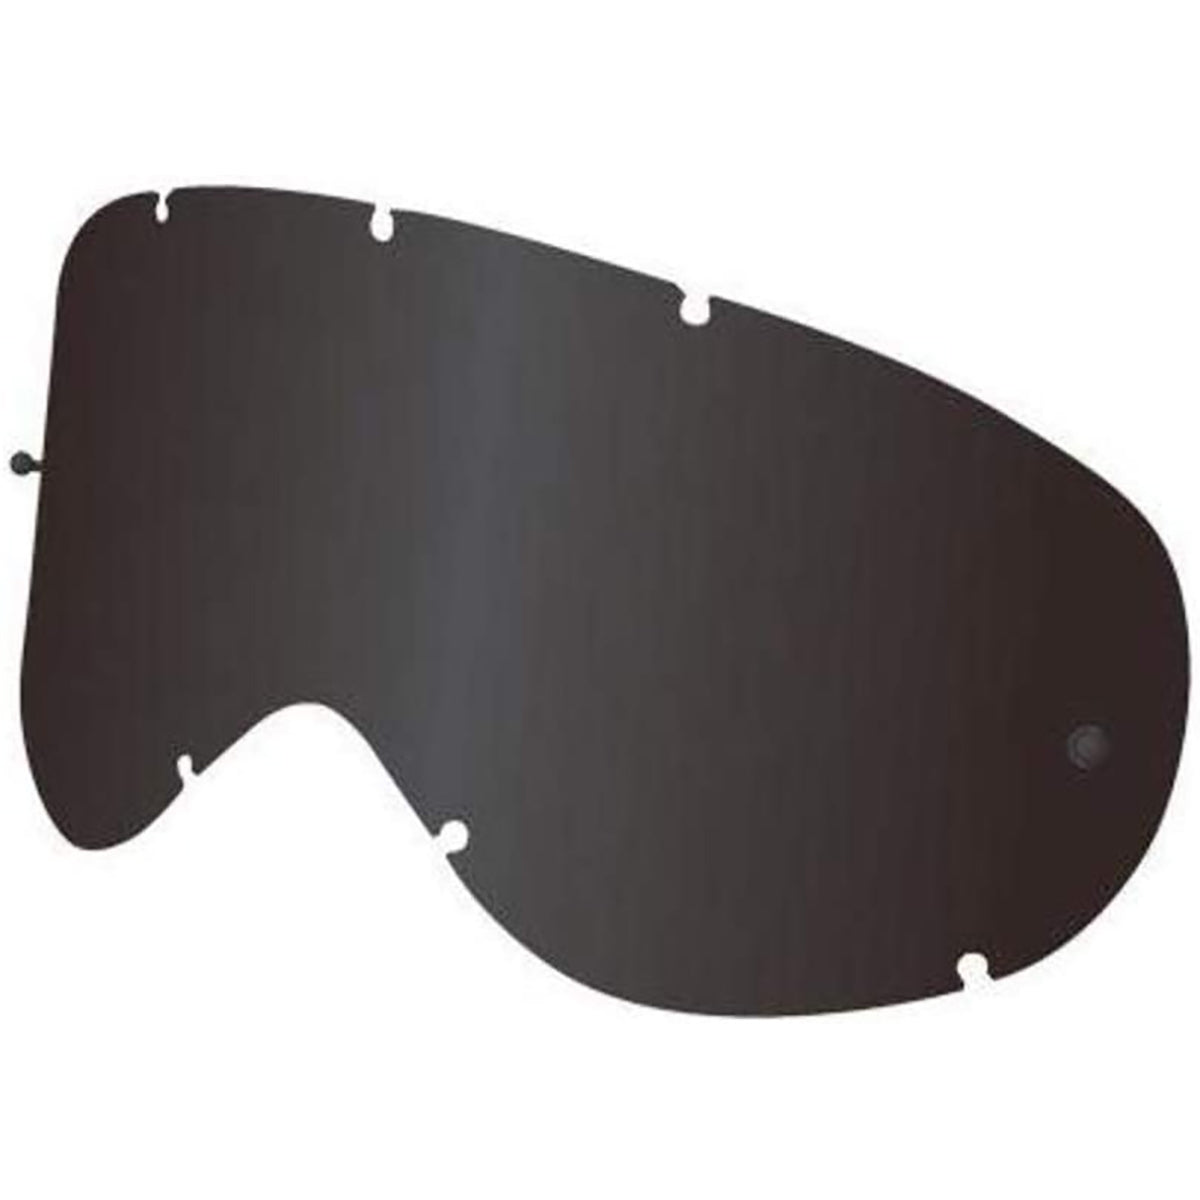 Dragon Alliance MDX Snow Polarized Replacement Lens Goggle Accessories-722-1274